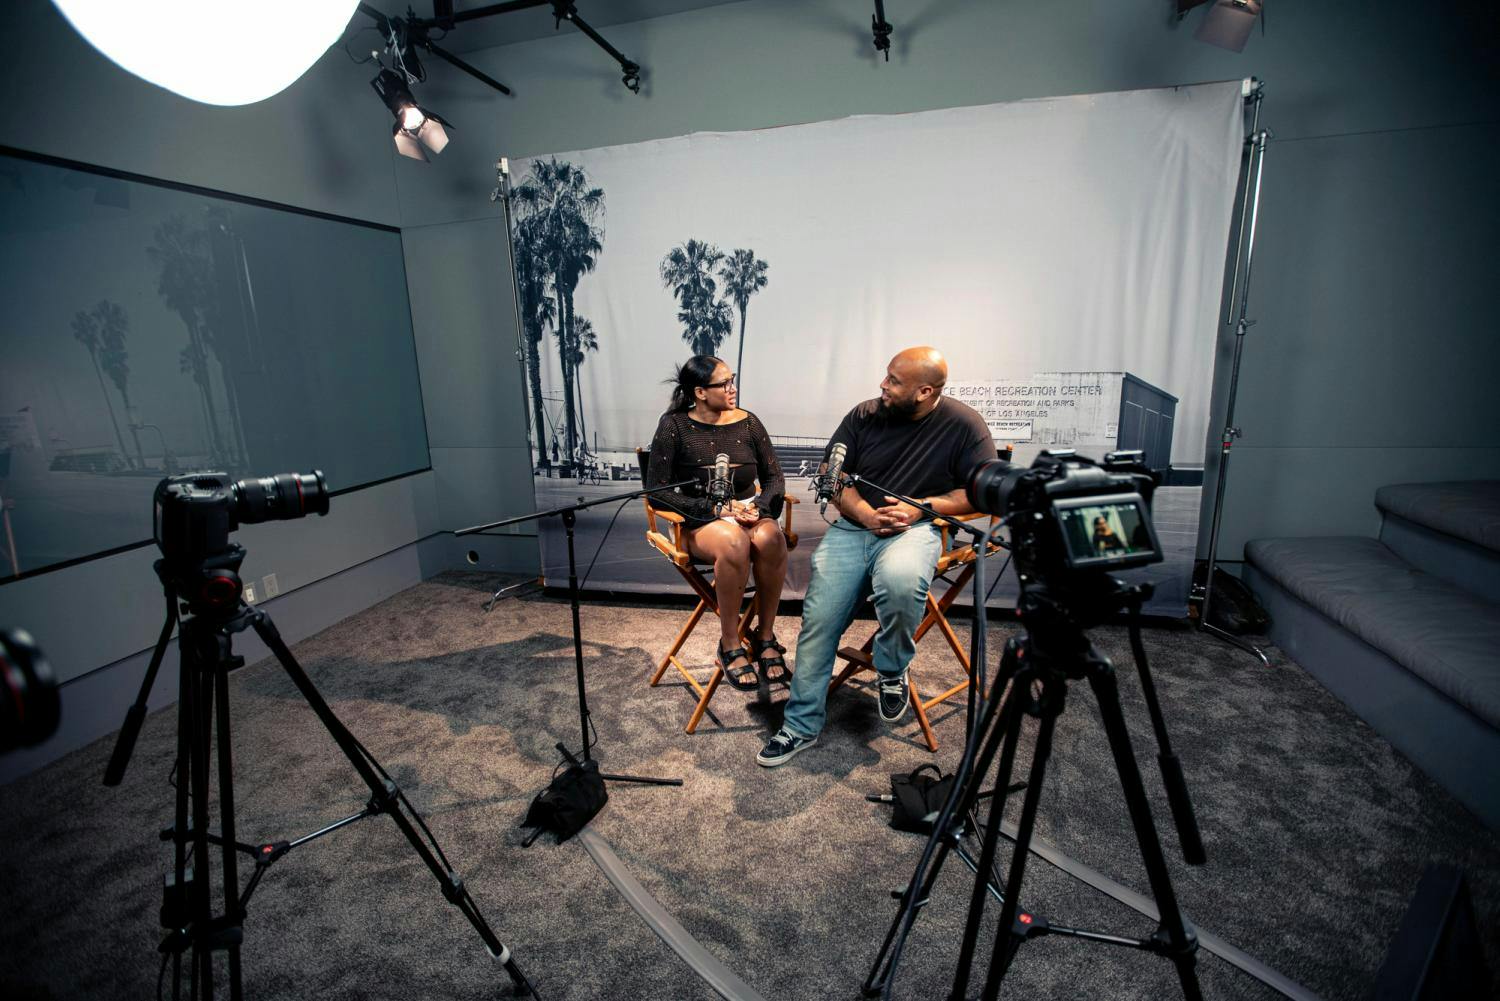 A behind-the-scenes look at a video interview production featuring a camera operator, video monitoring equipment, and interviewees.